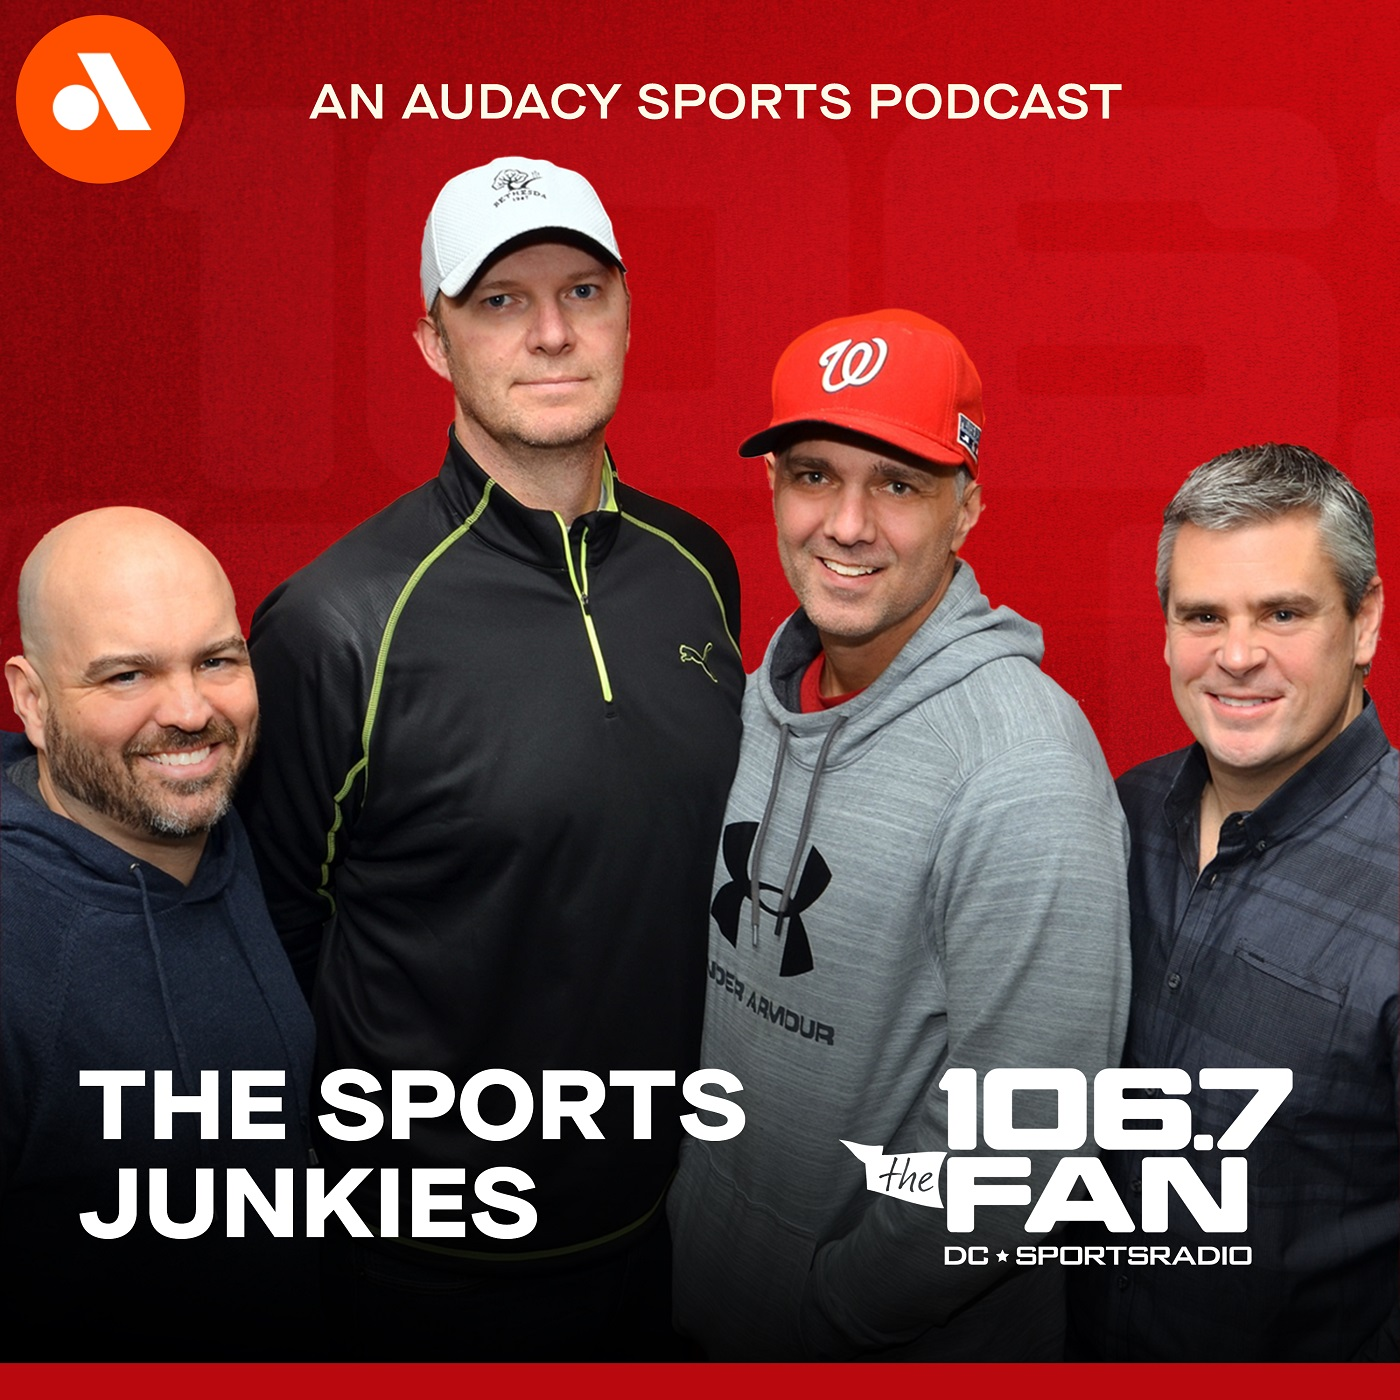 Sports Junkies 25th Anniversary Podcast: Smelliest Foot Contest